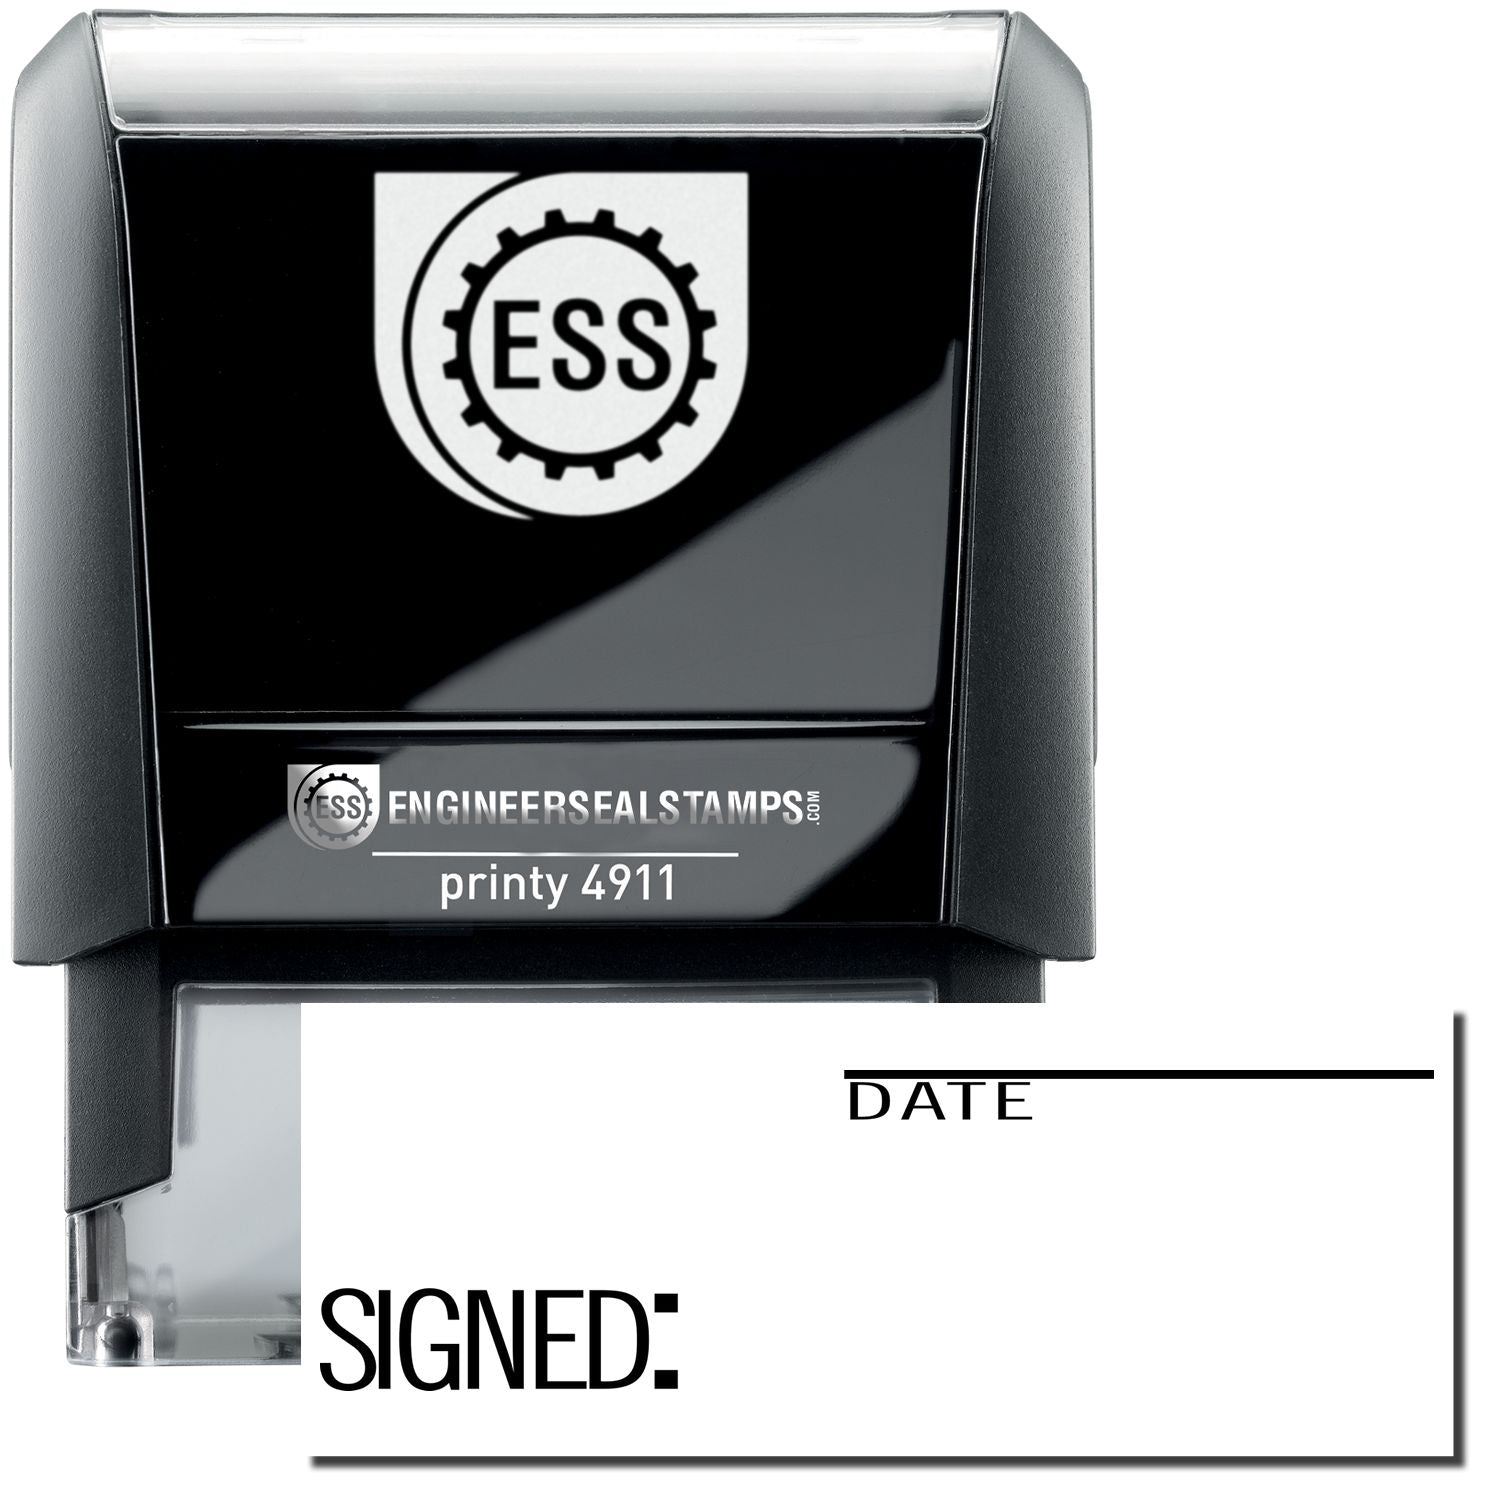 A self-inking stamp with a stamped image showing how the text "SIGNED:" in the left down position and "DATE" in the right top position (with a line above it) is displayed after stamping.